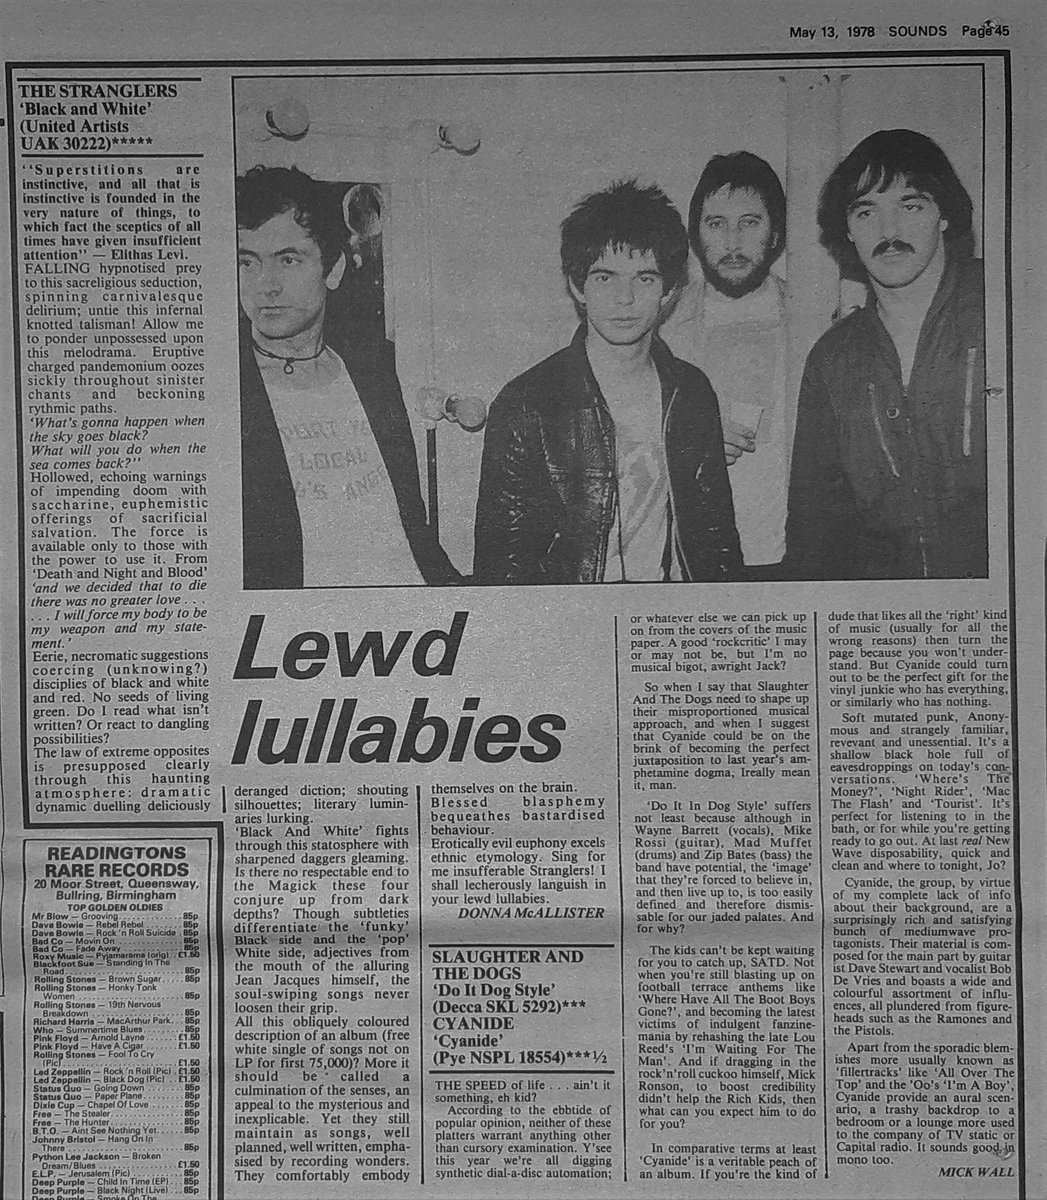 The Stranglers album 'Black and White' reviewed by Donna McAllister in Sounds 13th, May 1978. @StranglersSite